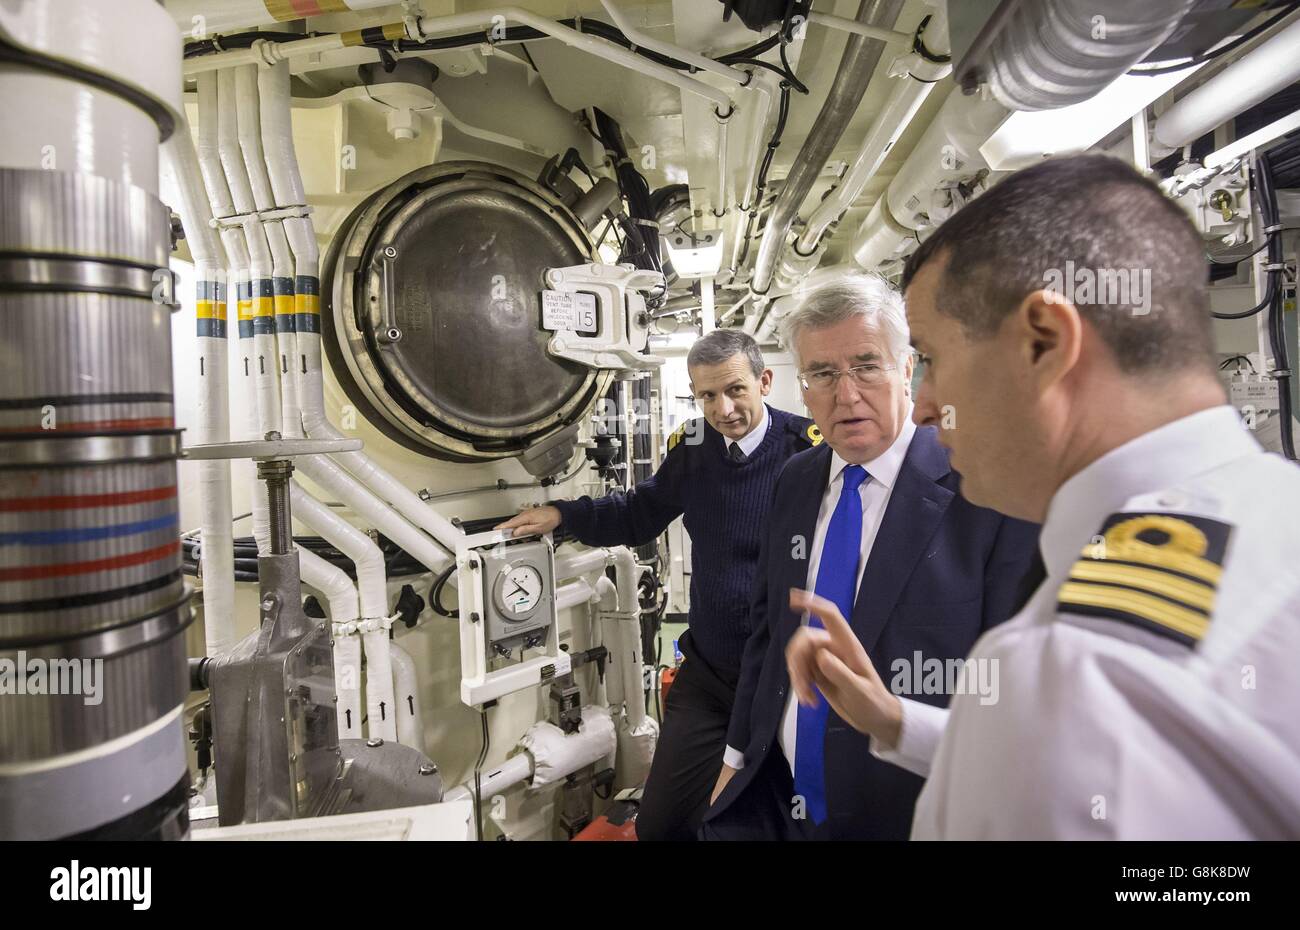 Defence Secretary Michael Fallon (centre) with Rear Admiral of Submarines and Assistant Chief of Naval Staff John Weale (left) and Daniel Martyn (right) Commanding Officer of HMS Vigilant in the missiles compartment that can house up to 16 Trident 2 D5 nuclear missiles, during a visit to Vanguard-class submarine HMS Vigilant, one of the UK's four nuclear warhead-carrying submarines, at HM Naval Base Clyde, also known as Faslane, in Scotland. Stock Photo